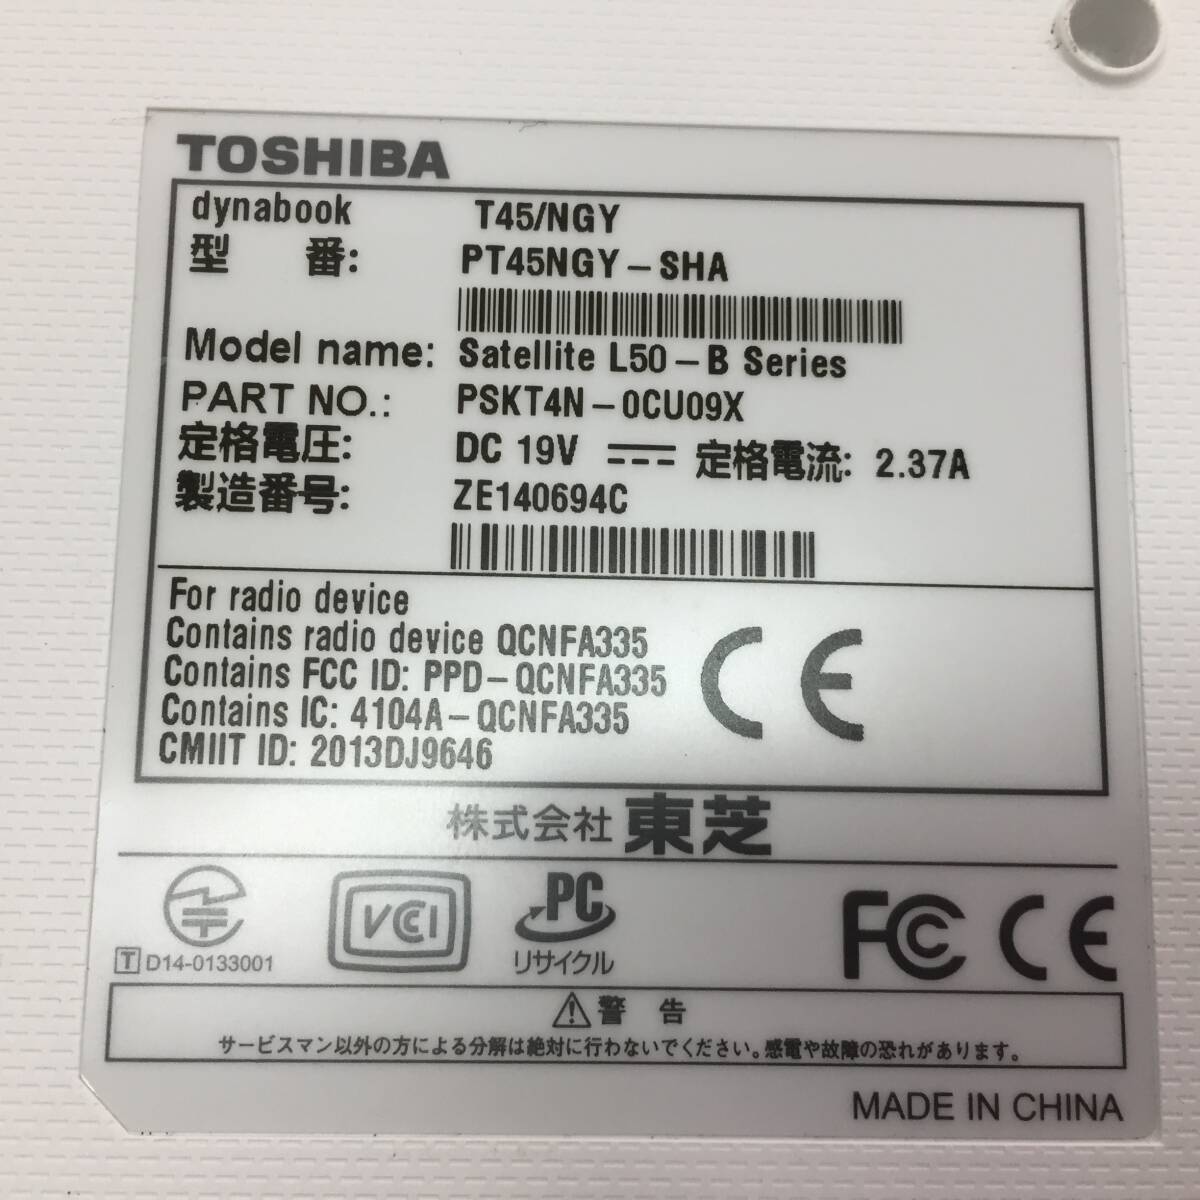  prompt decision *TOSHIBA dynabook T45/NGY PT45NGY-SHA Note PC Celeron 2957U 1.40GHz[ junk ]